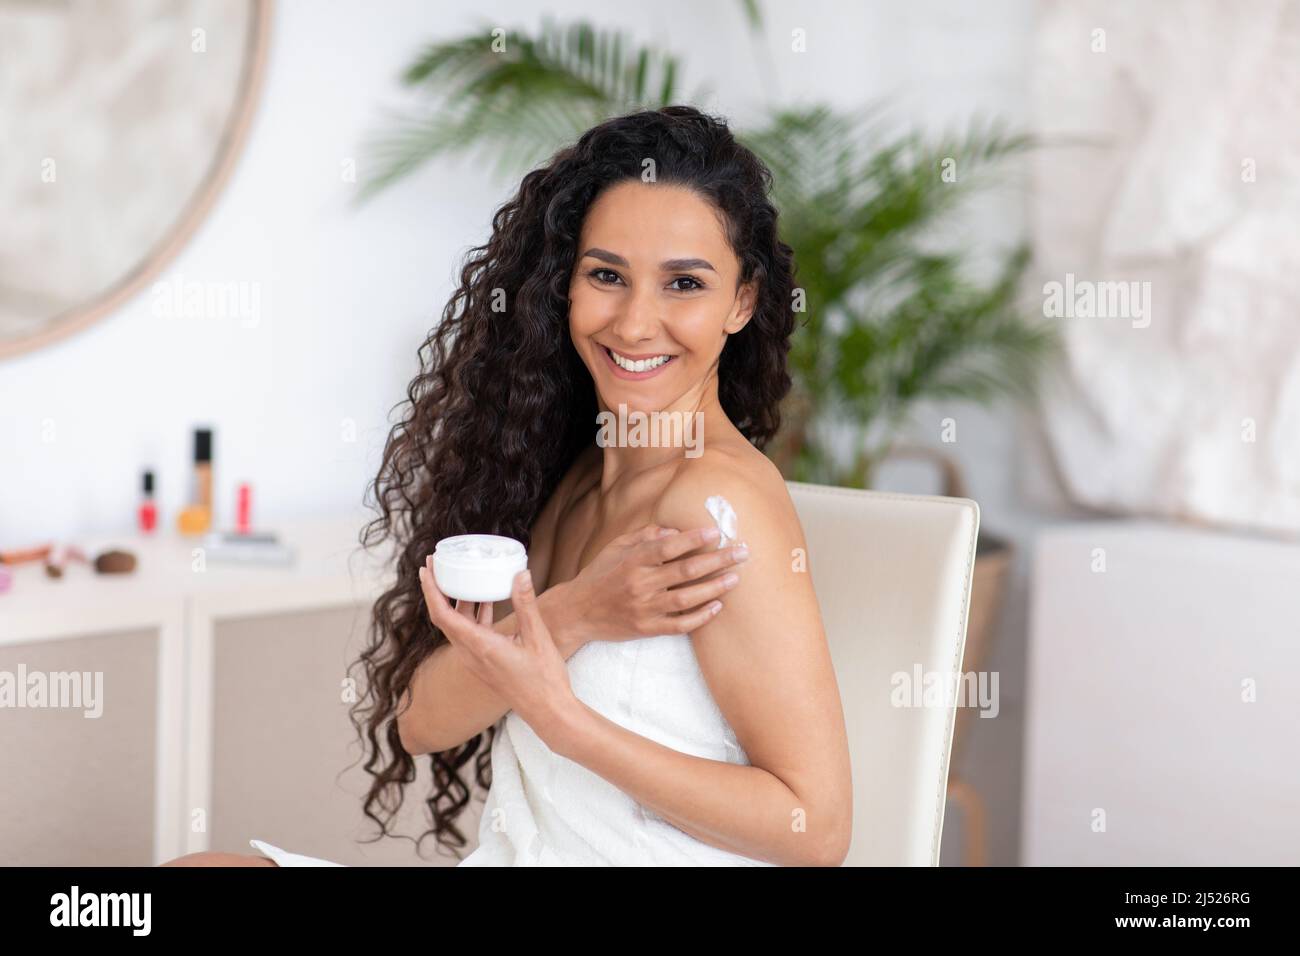 Smiling young caucasian brunette woman with long curly hair in towel applies cream on shoulder in bedroom interior Stock Photo